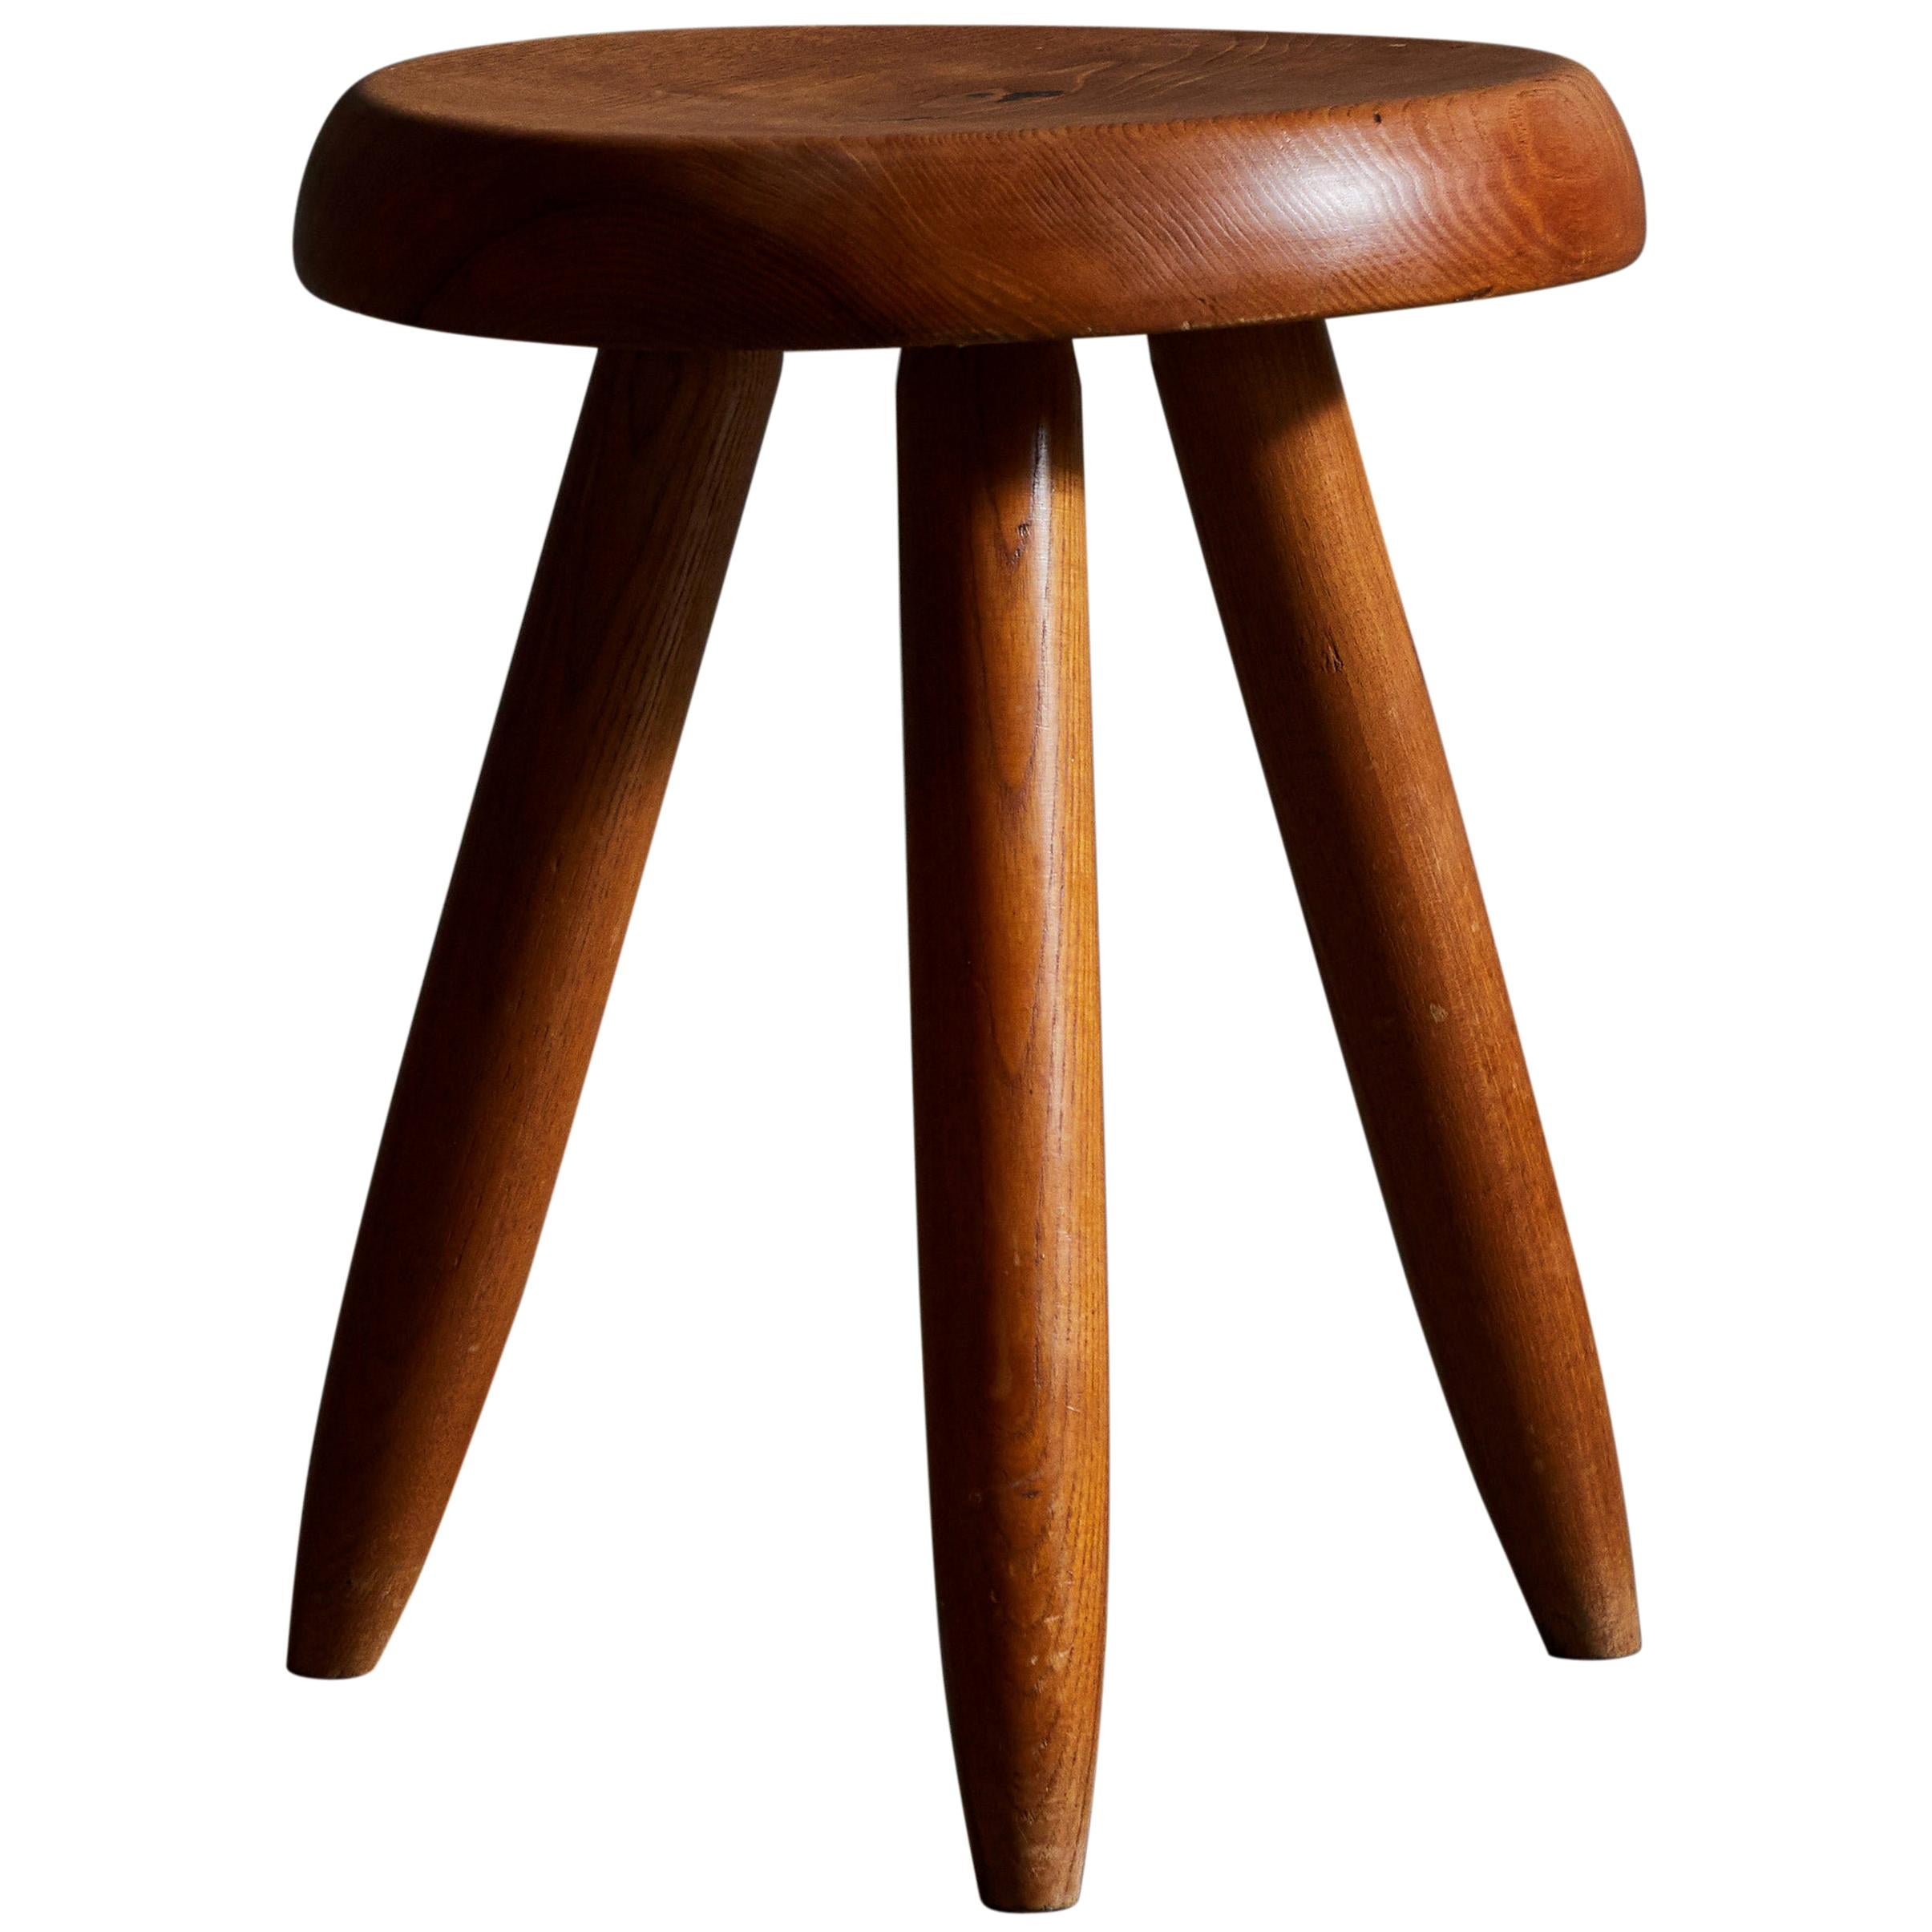 Stool by Charlotte Perriand